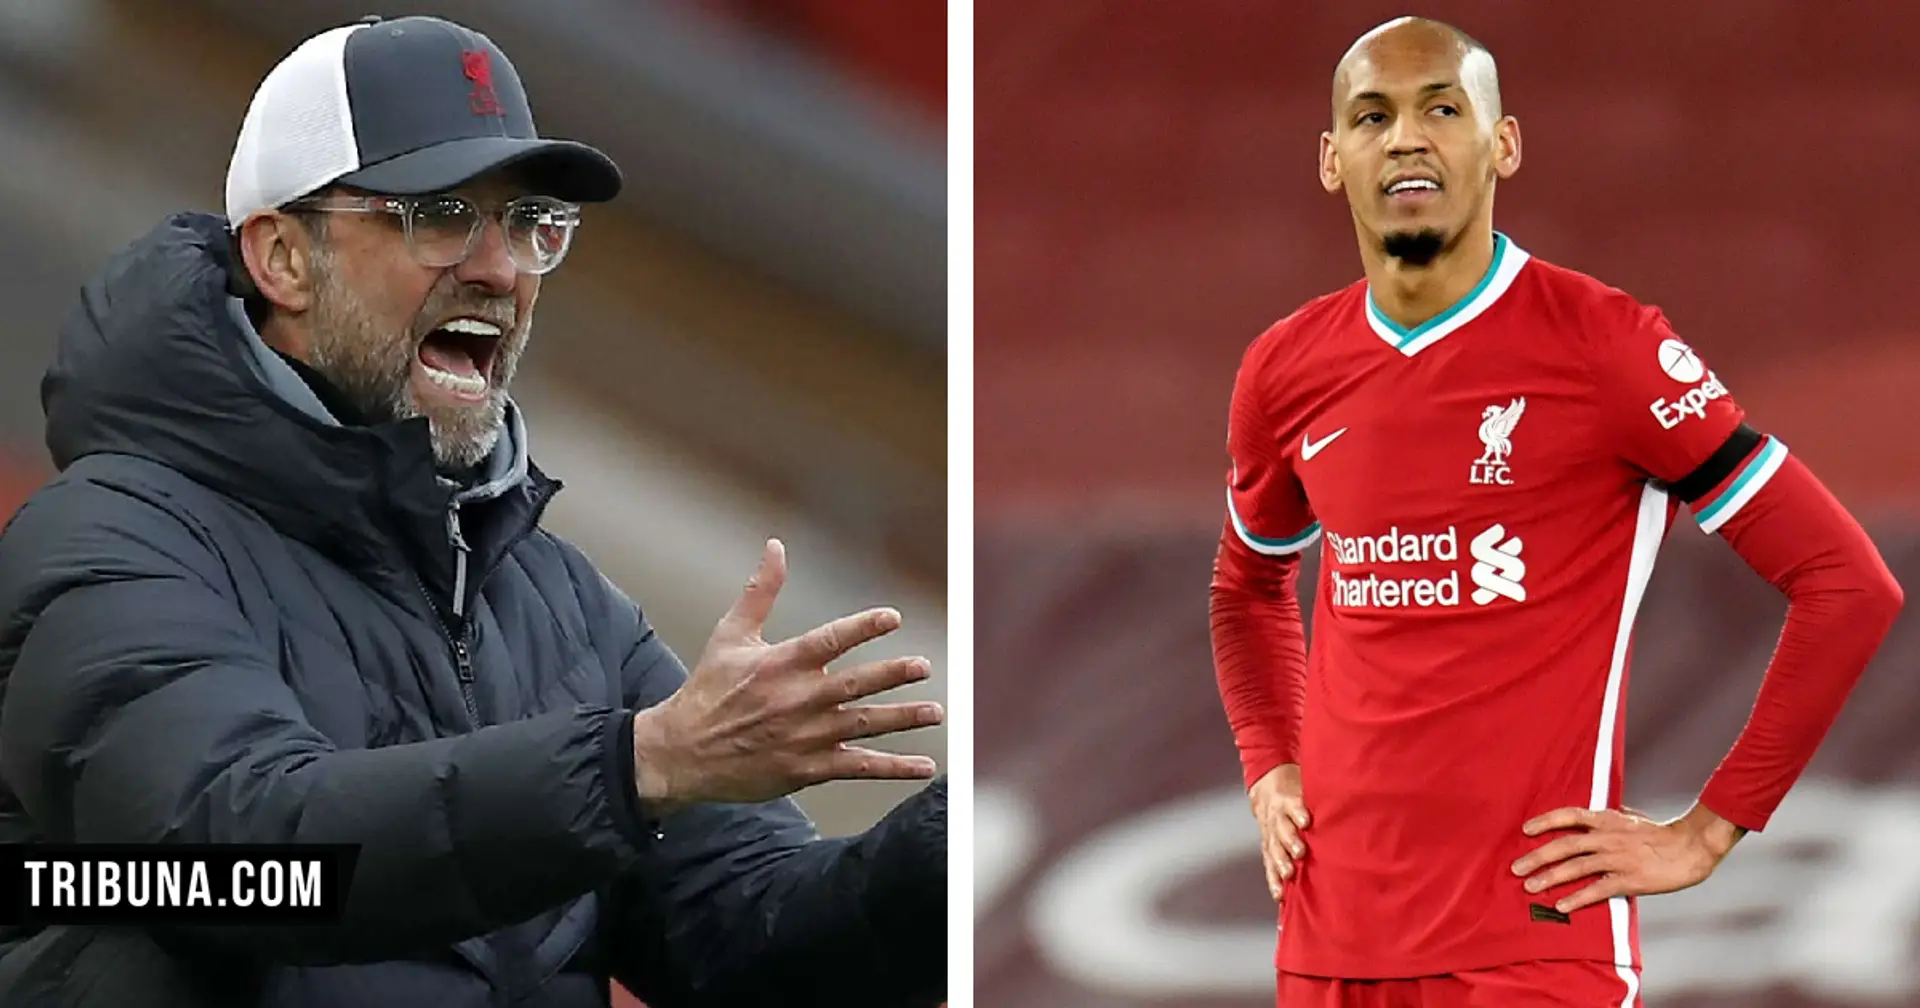 0 wins in 2021: Stats show huge difference in Fabinho's impact in midfield compared to defence